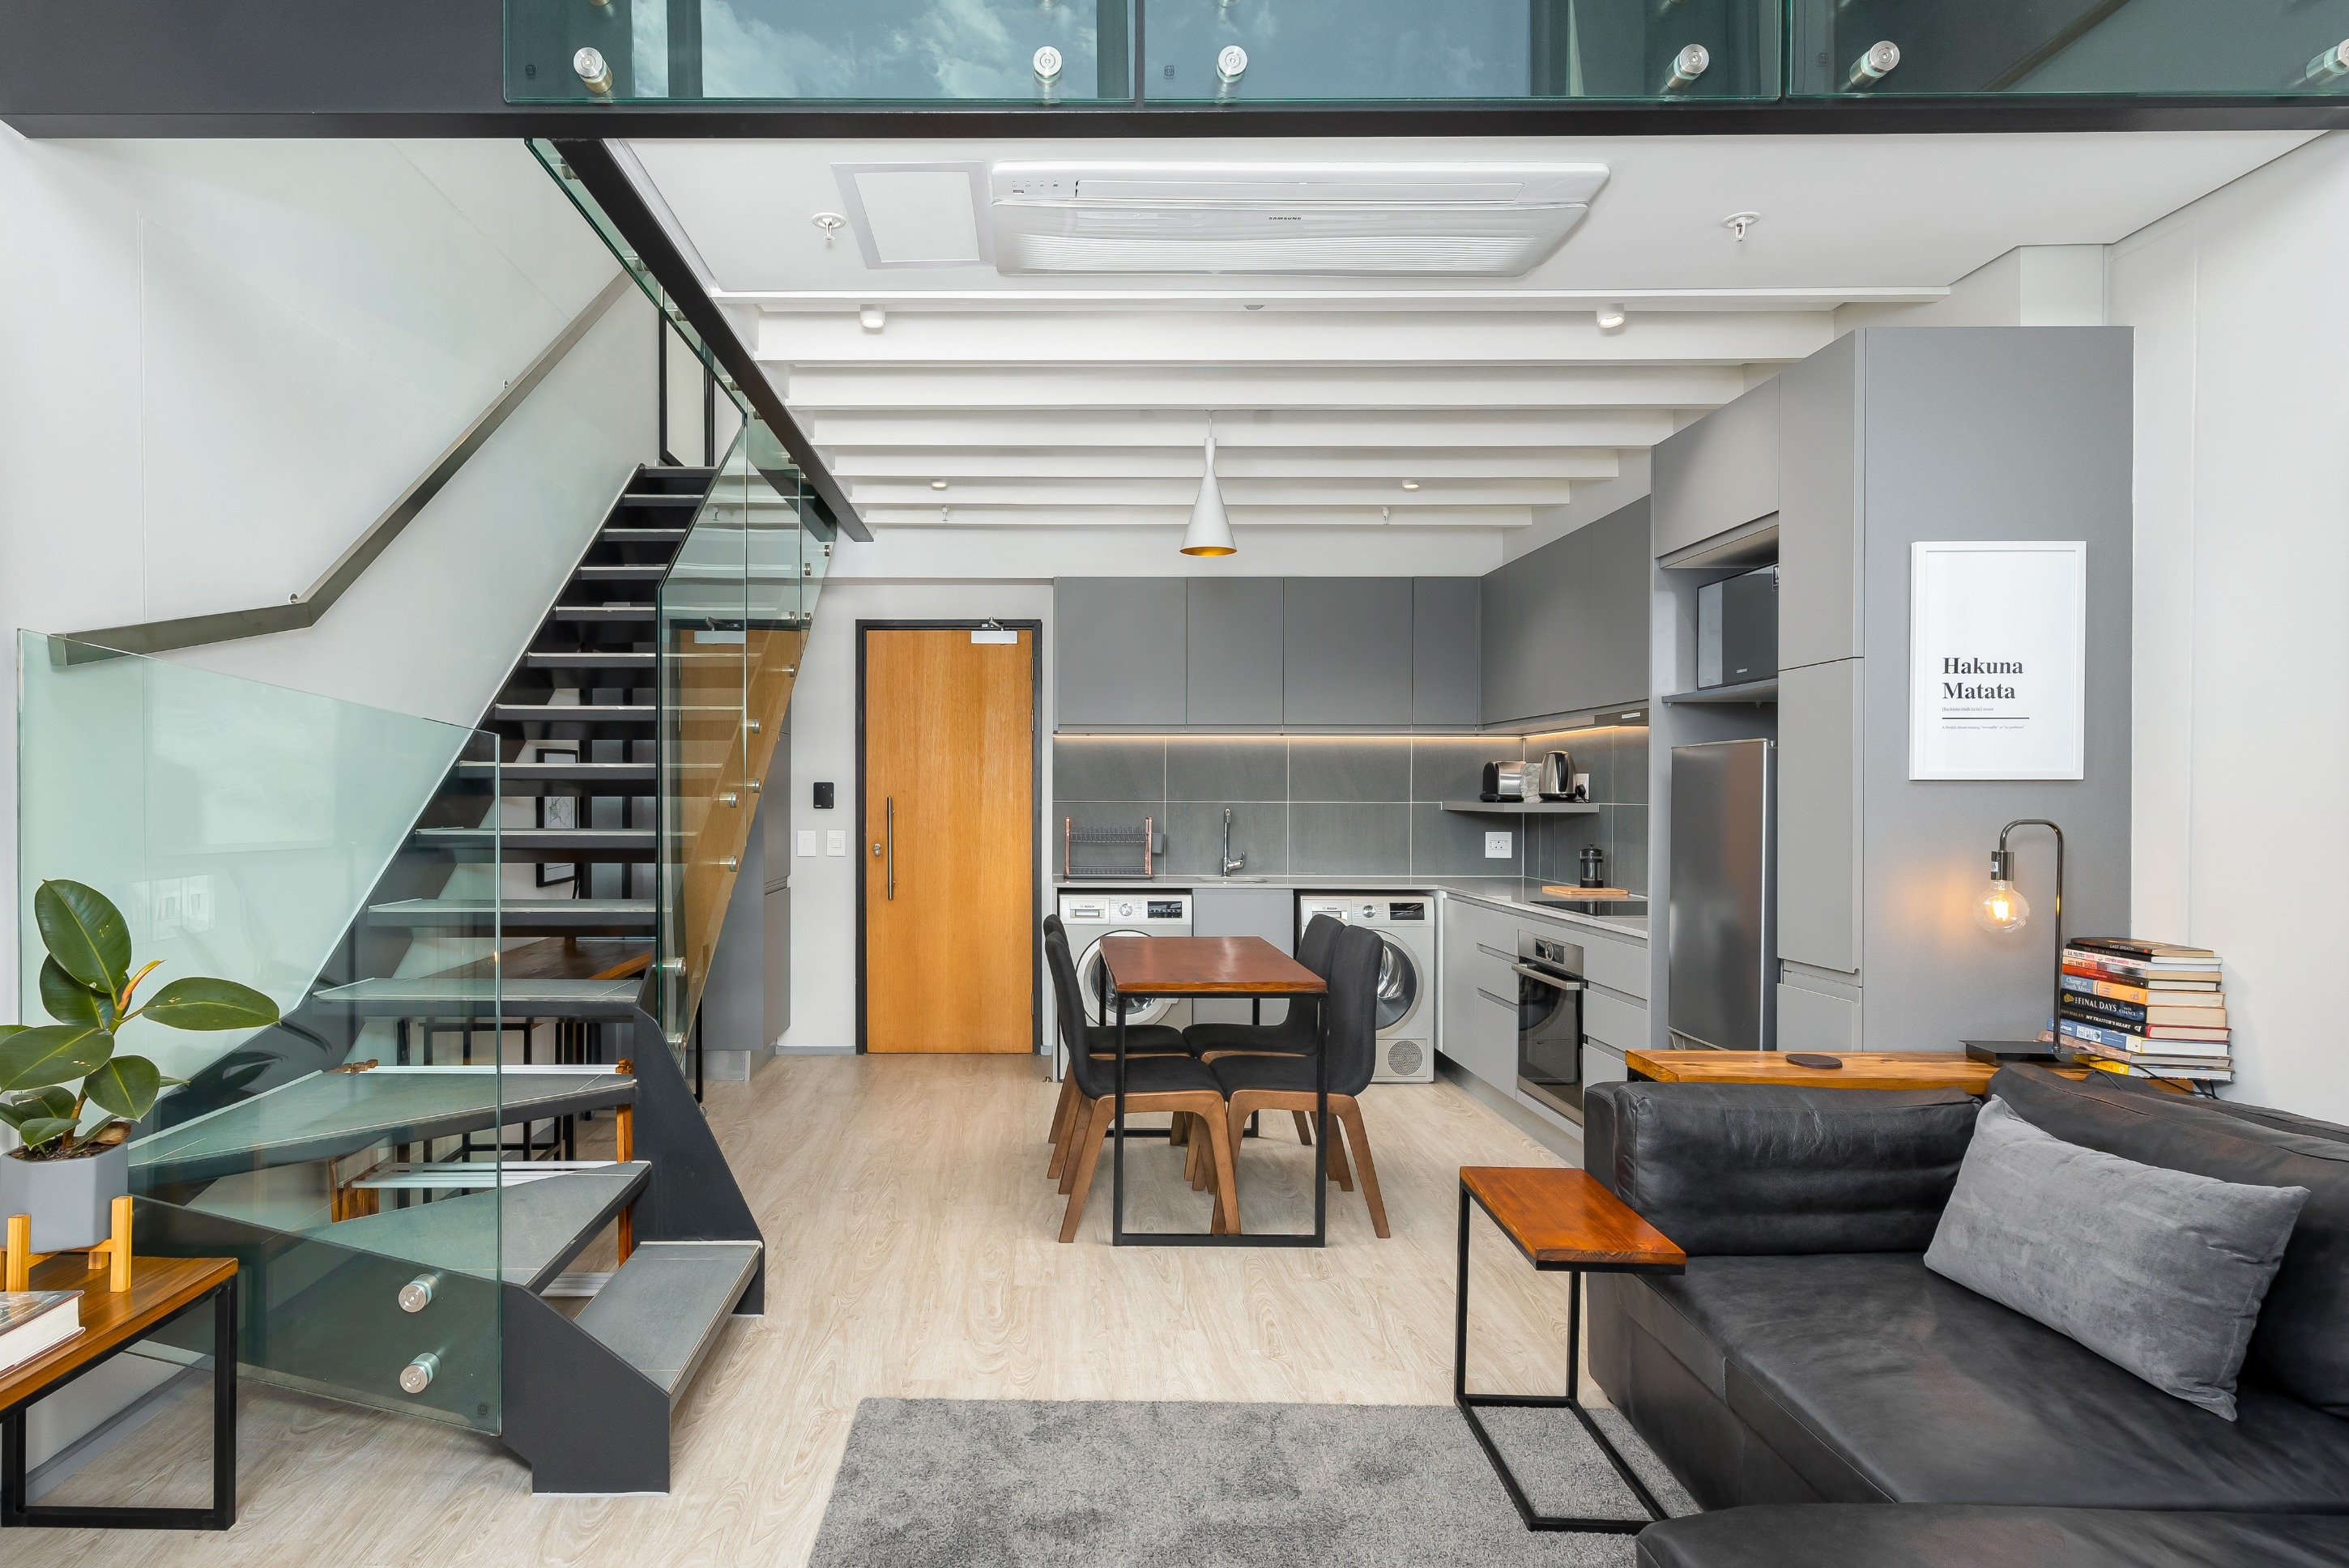 Property Image 2 - Sleek Bright Loft Styled Apartment with Tall Windows